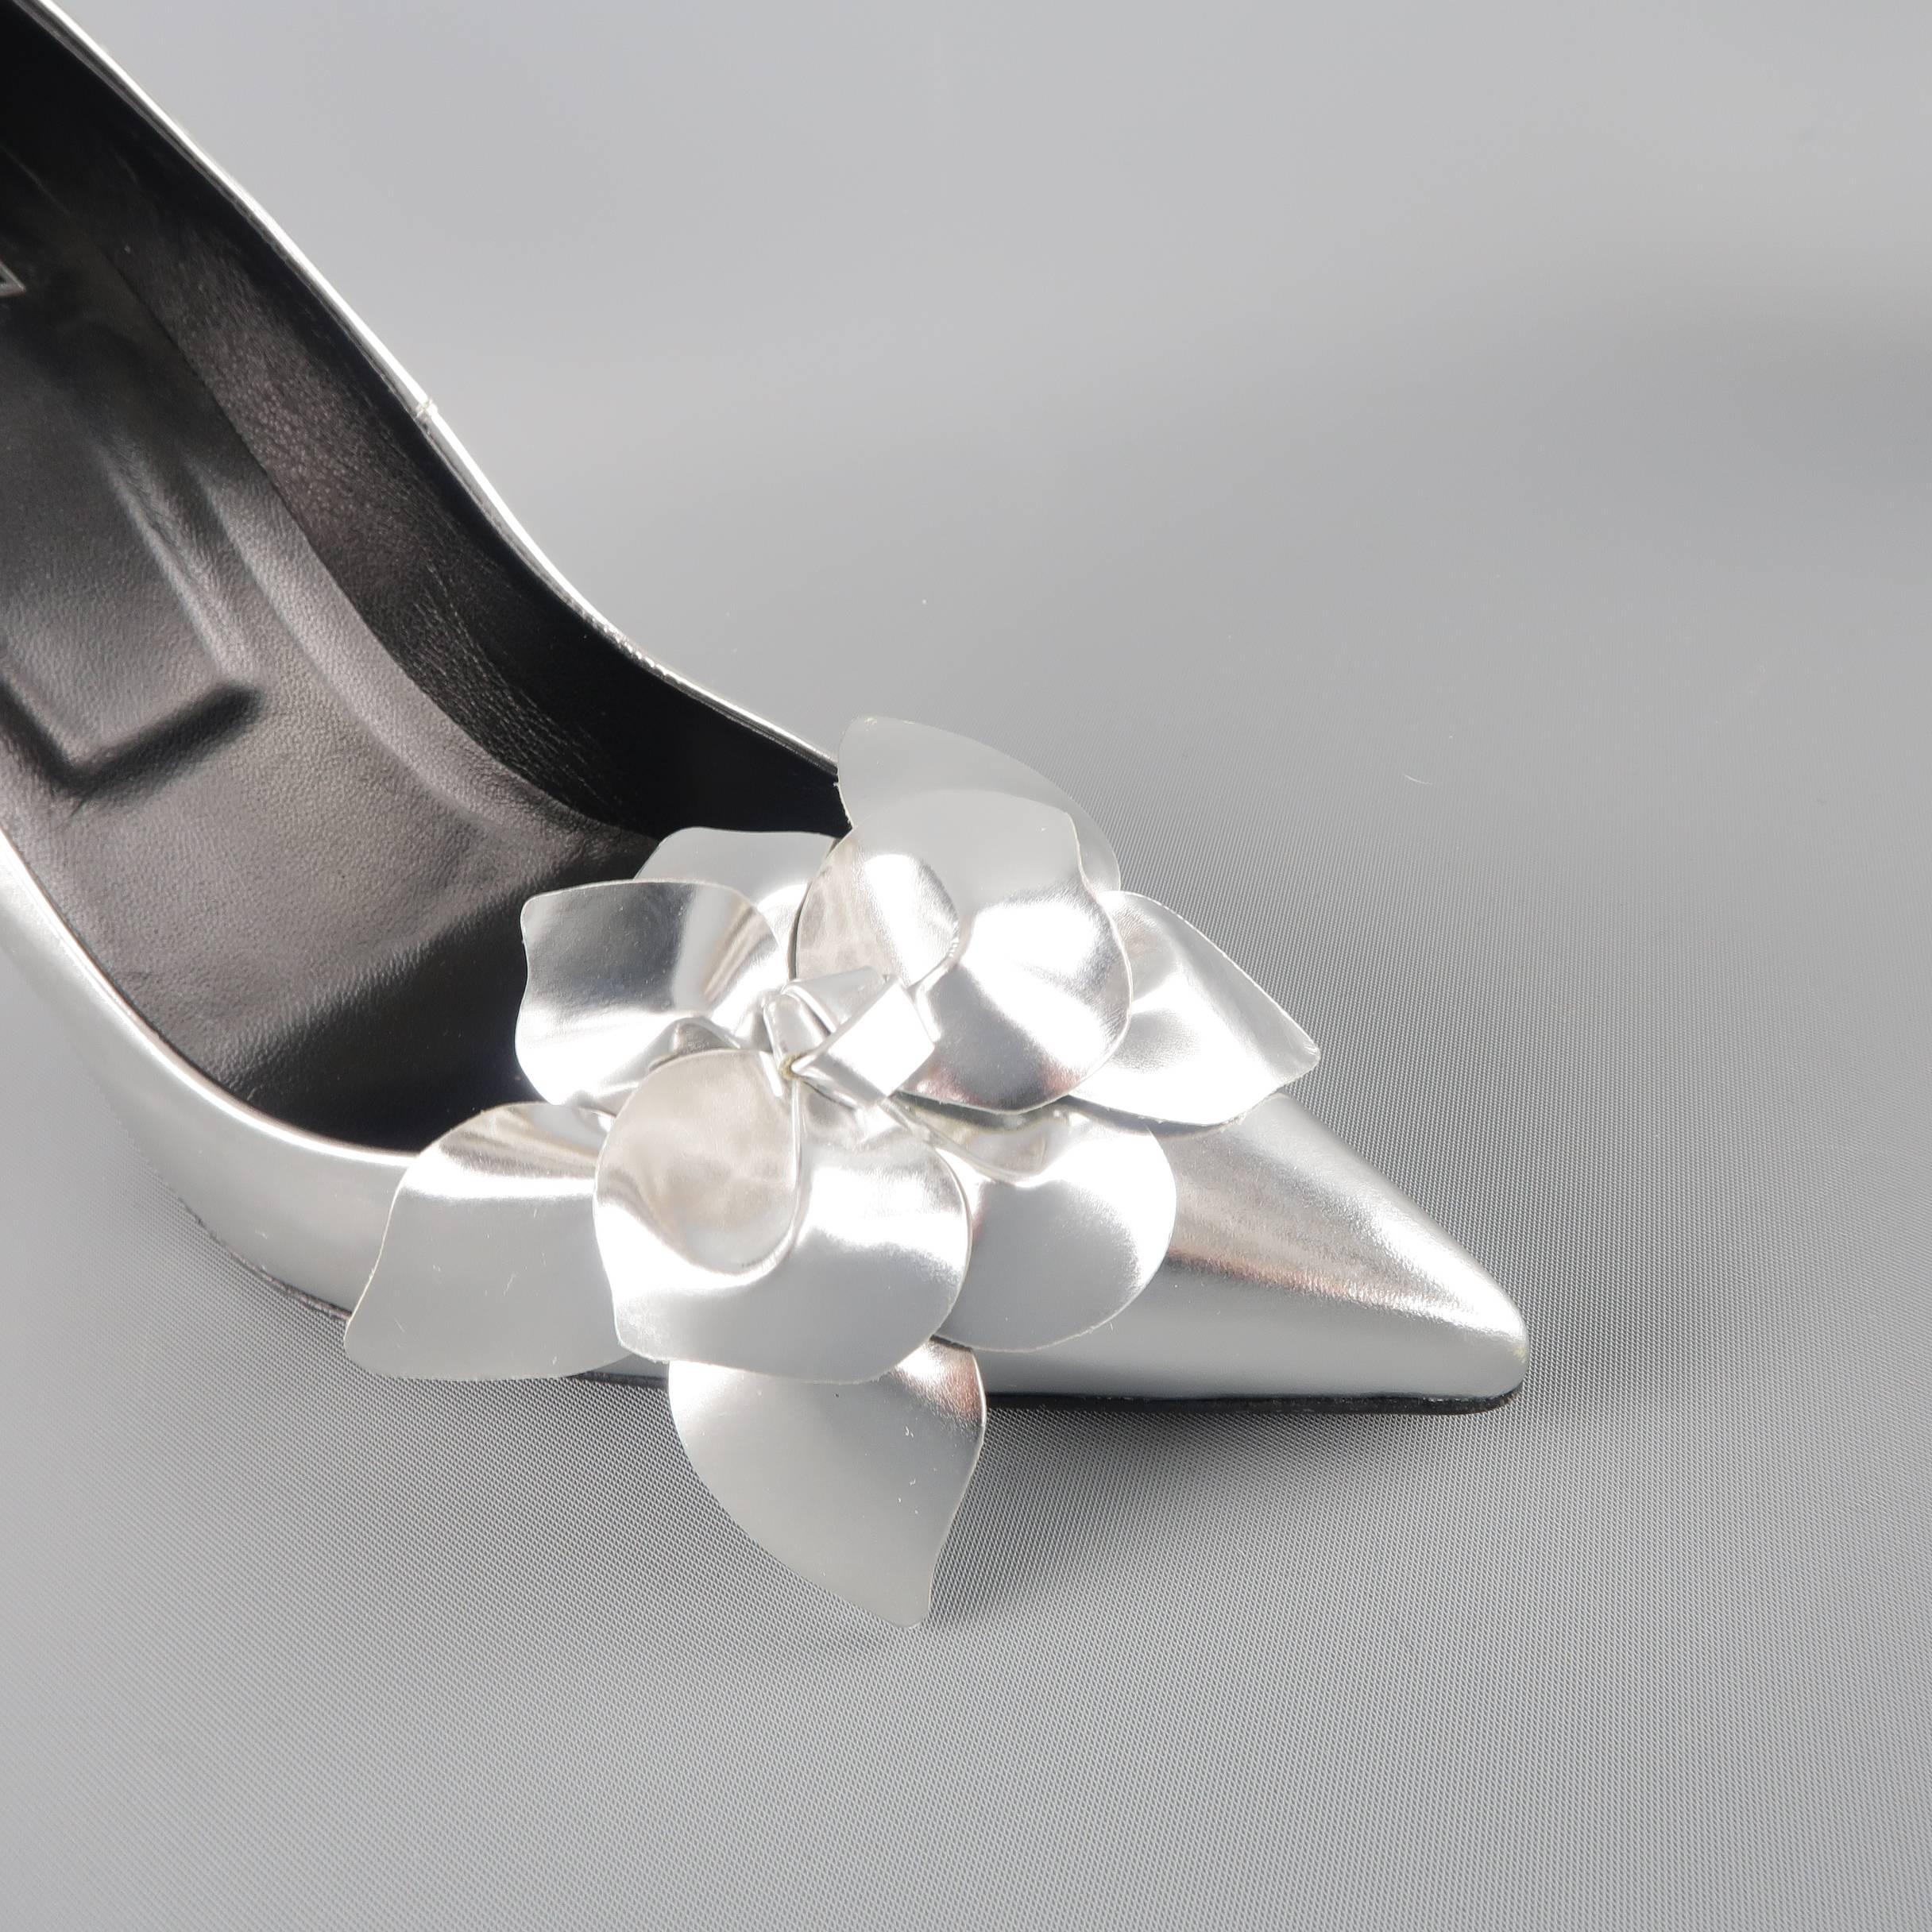 ROGER VIVIER “Privilege Porcelaine” pumps come in metallic silver leather and feature a pointed toe, covered stiletto heel, and leather flower and leaf appliques. Never worn. Made in Italy.
 
New without Tags.
Marked: IT 39
 
Heel: 4.25 in.


SKU: